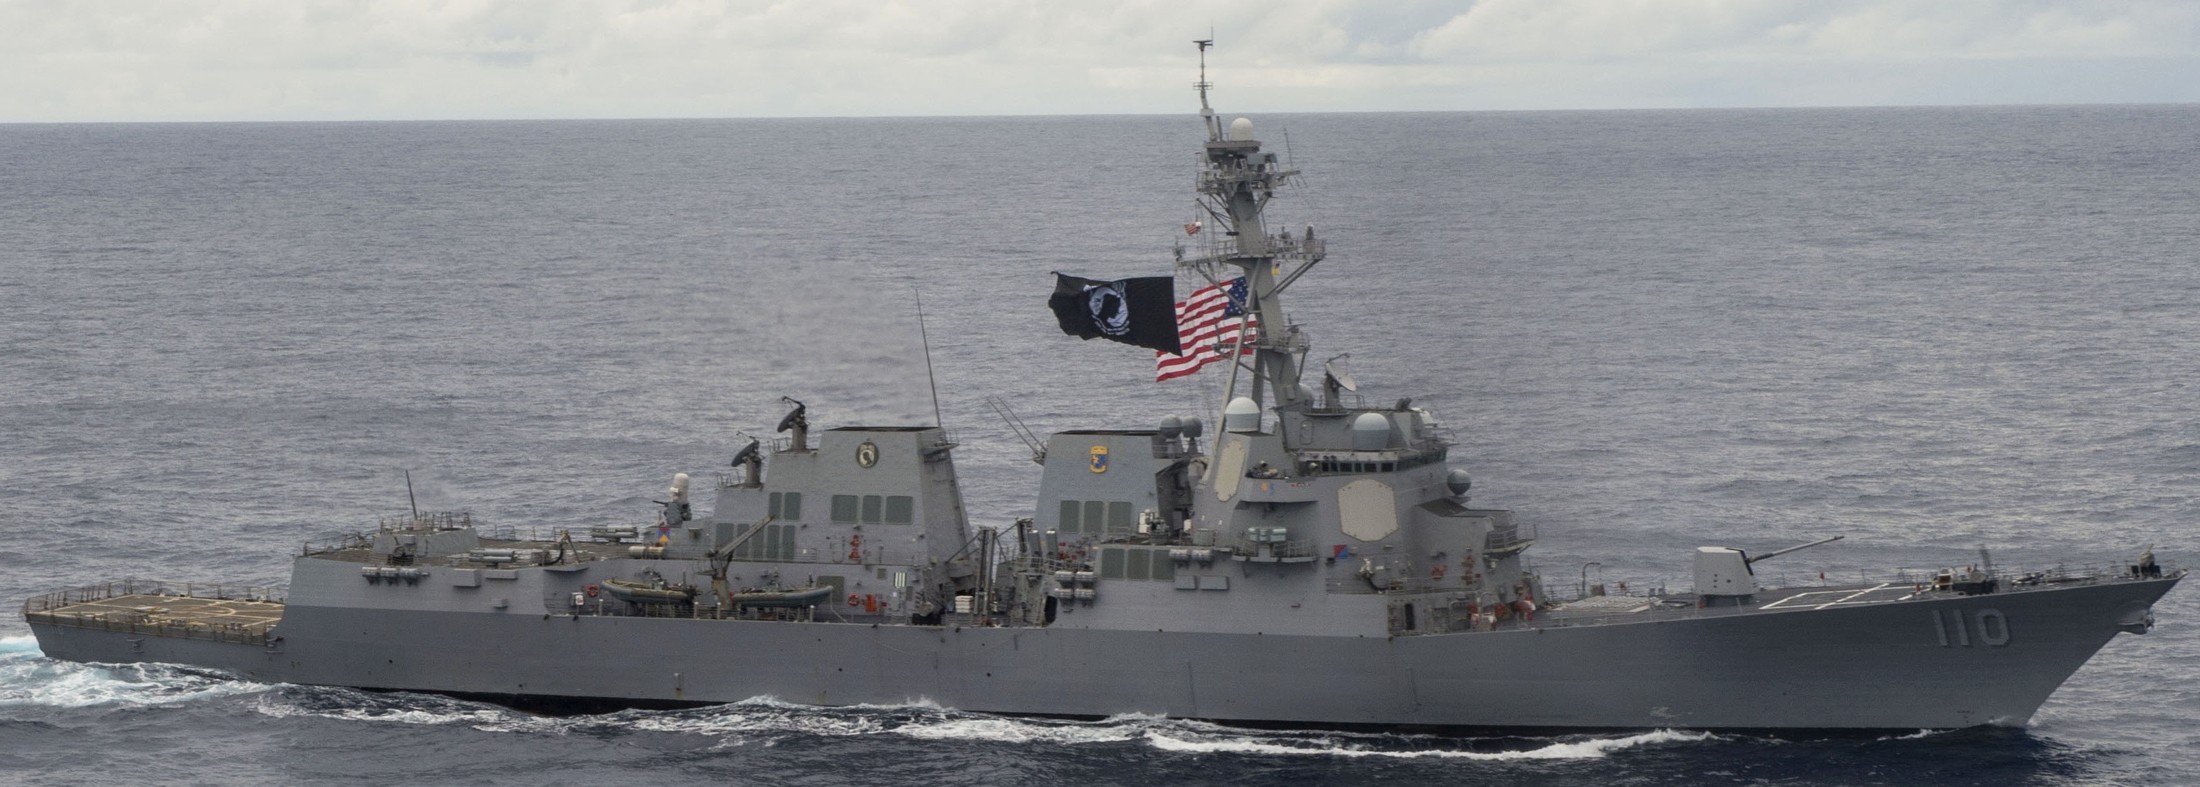 ddg-110 uss william p. lawrence arleigh burke class guided missile destroyer aegis us navy 18